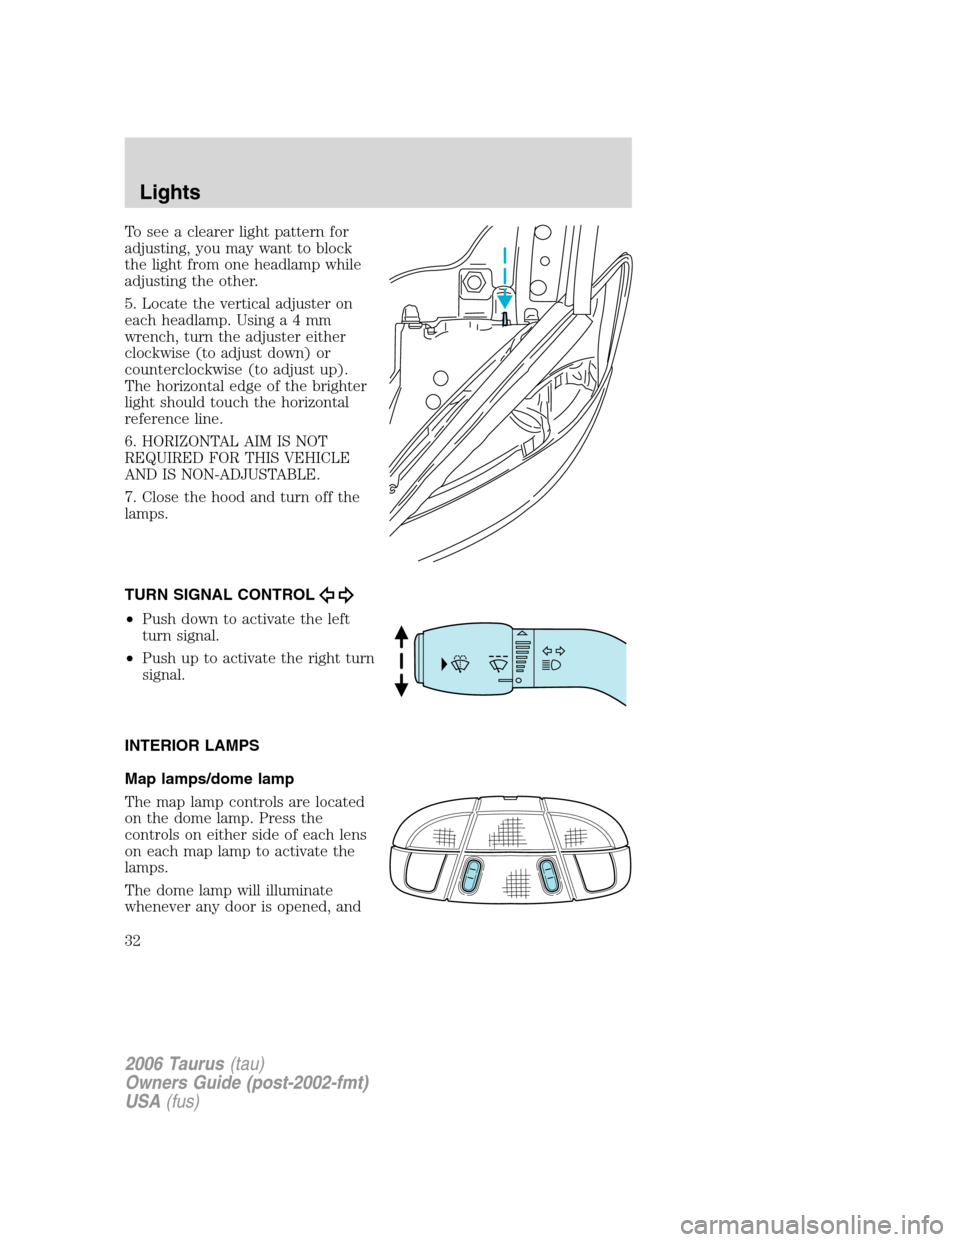 FORD TAURUS 2006 4.G Owners Guide To see a clearer light pattern for
adjusting, you may want to block
the light from one headlamp while
adjusting the other.
5. Locate the vertical adjuster on
each headlamp. Usinga4mm
wrench, turn the 